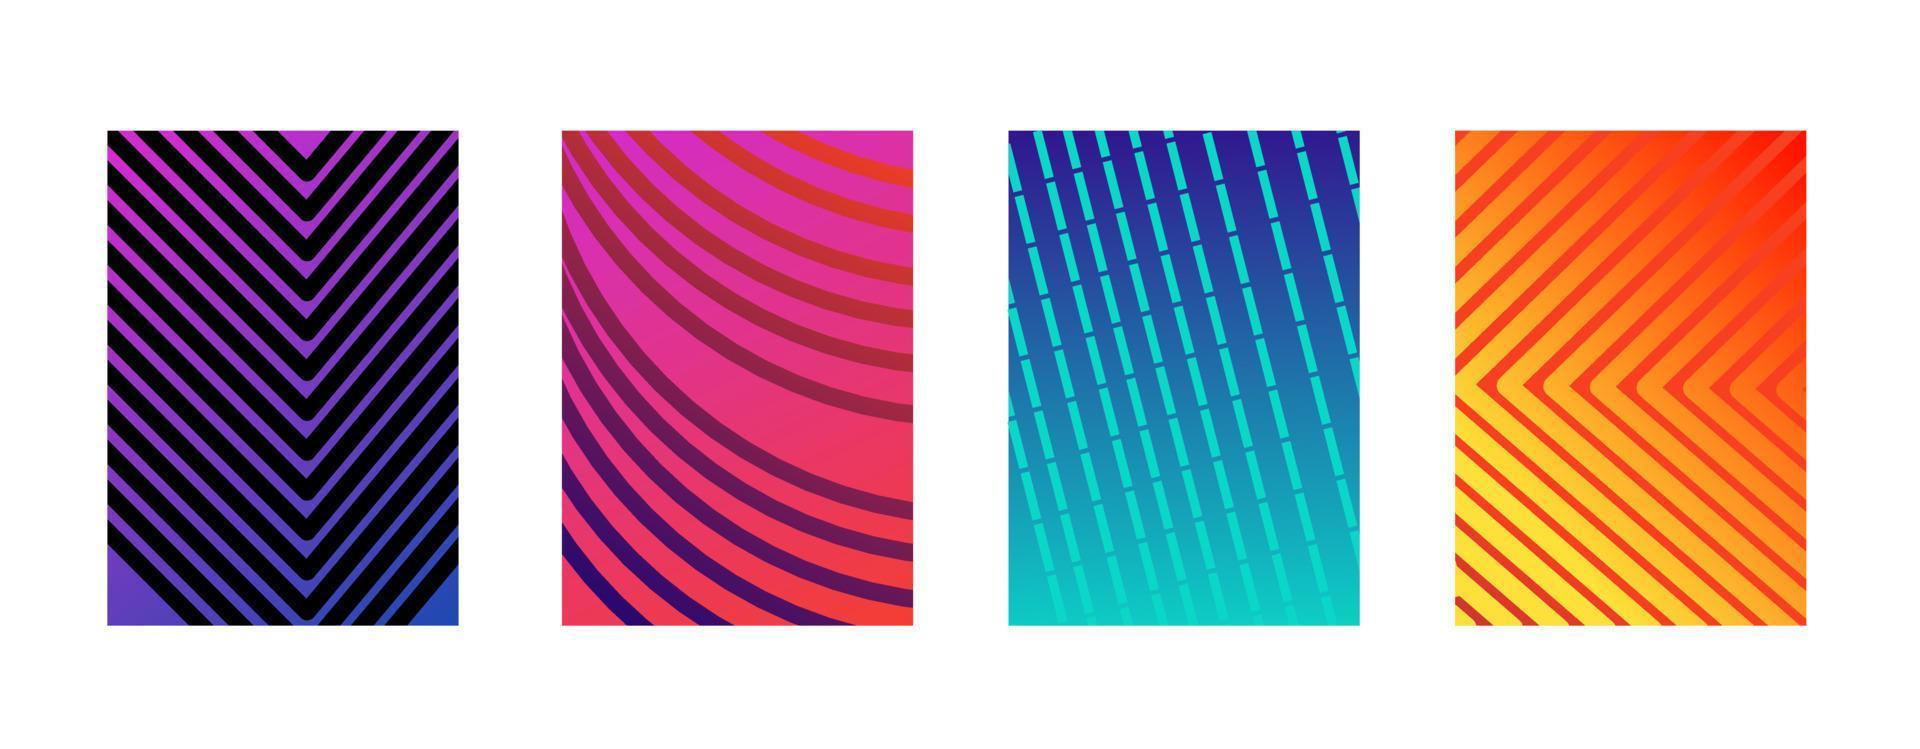 Minimal covers design. Colorful halftone gradients. Future geometric patterns. vector